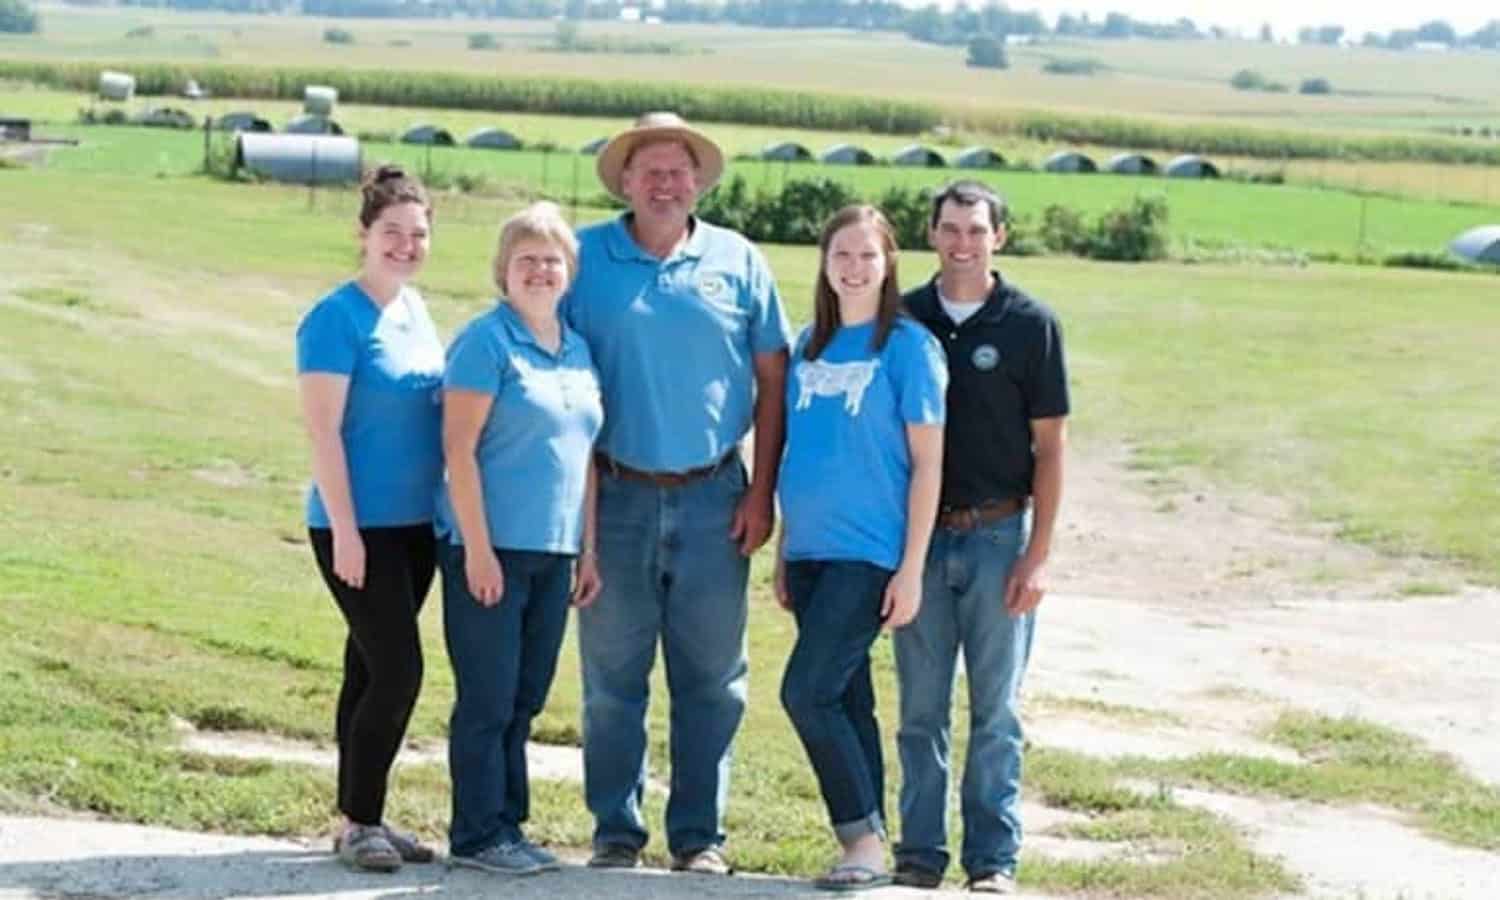 An Iowa farm uses sustainable farming methods for the health of their livestock, their family, and their community.